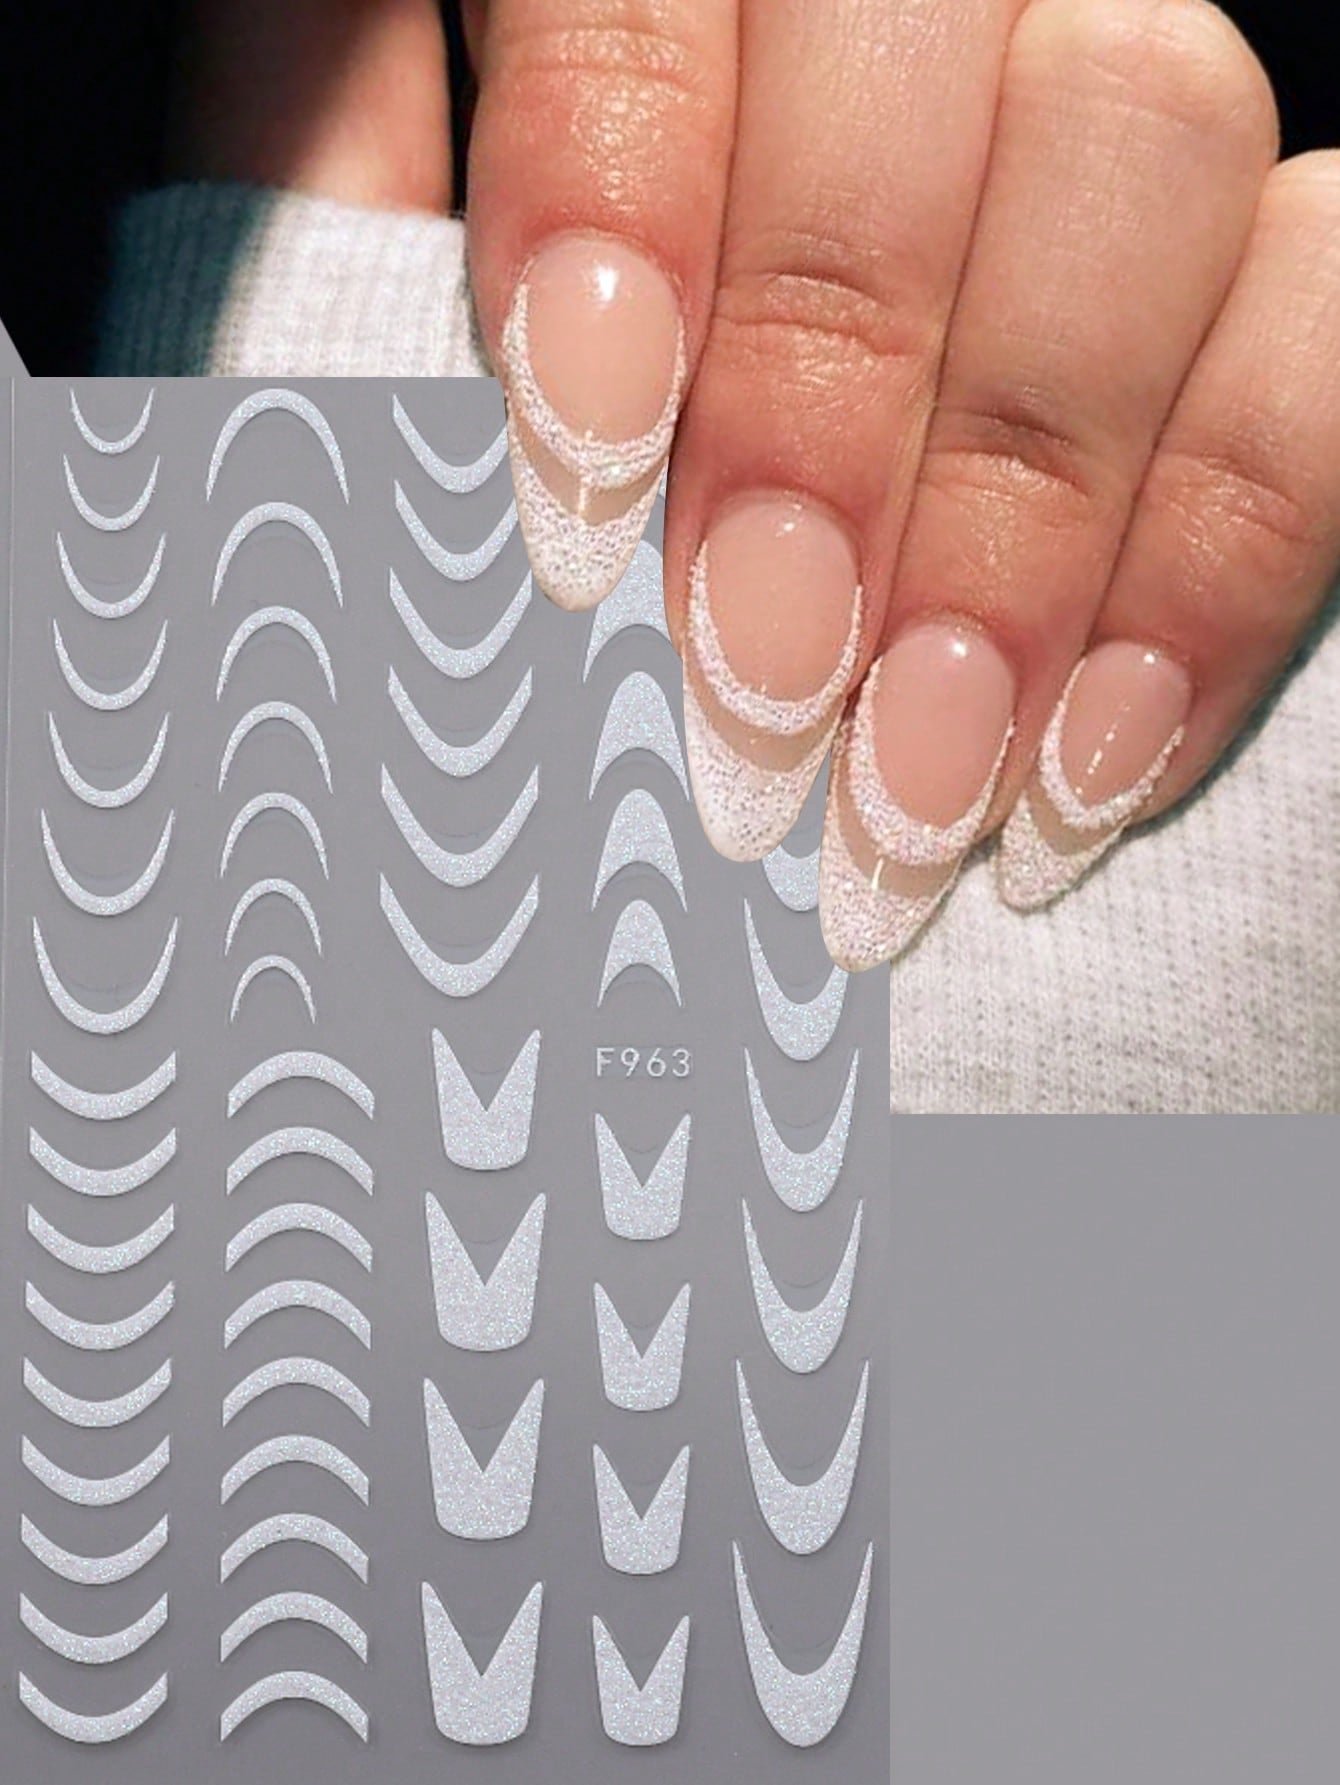 Beauty from Beyond French Manicure Nail Art Stickers, Self-Adhesive Nail Tips Guides for DIY Decoration Stencil Tools🔥